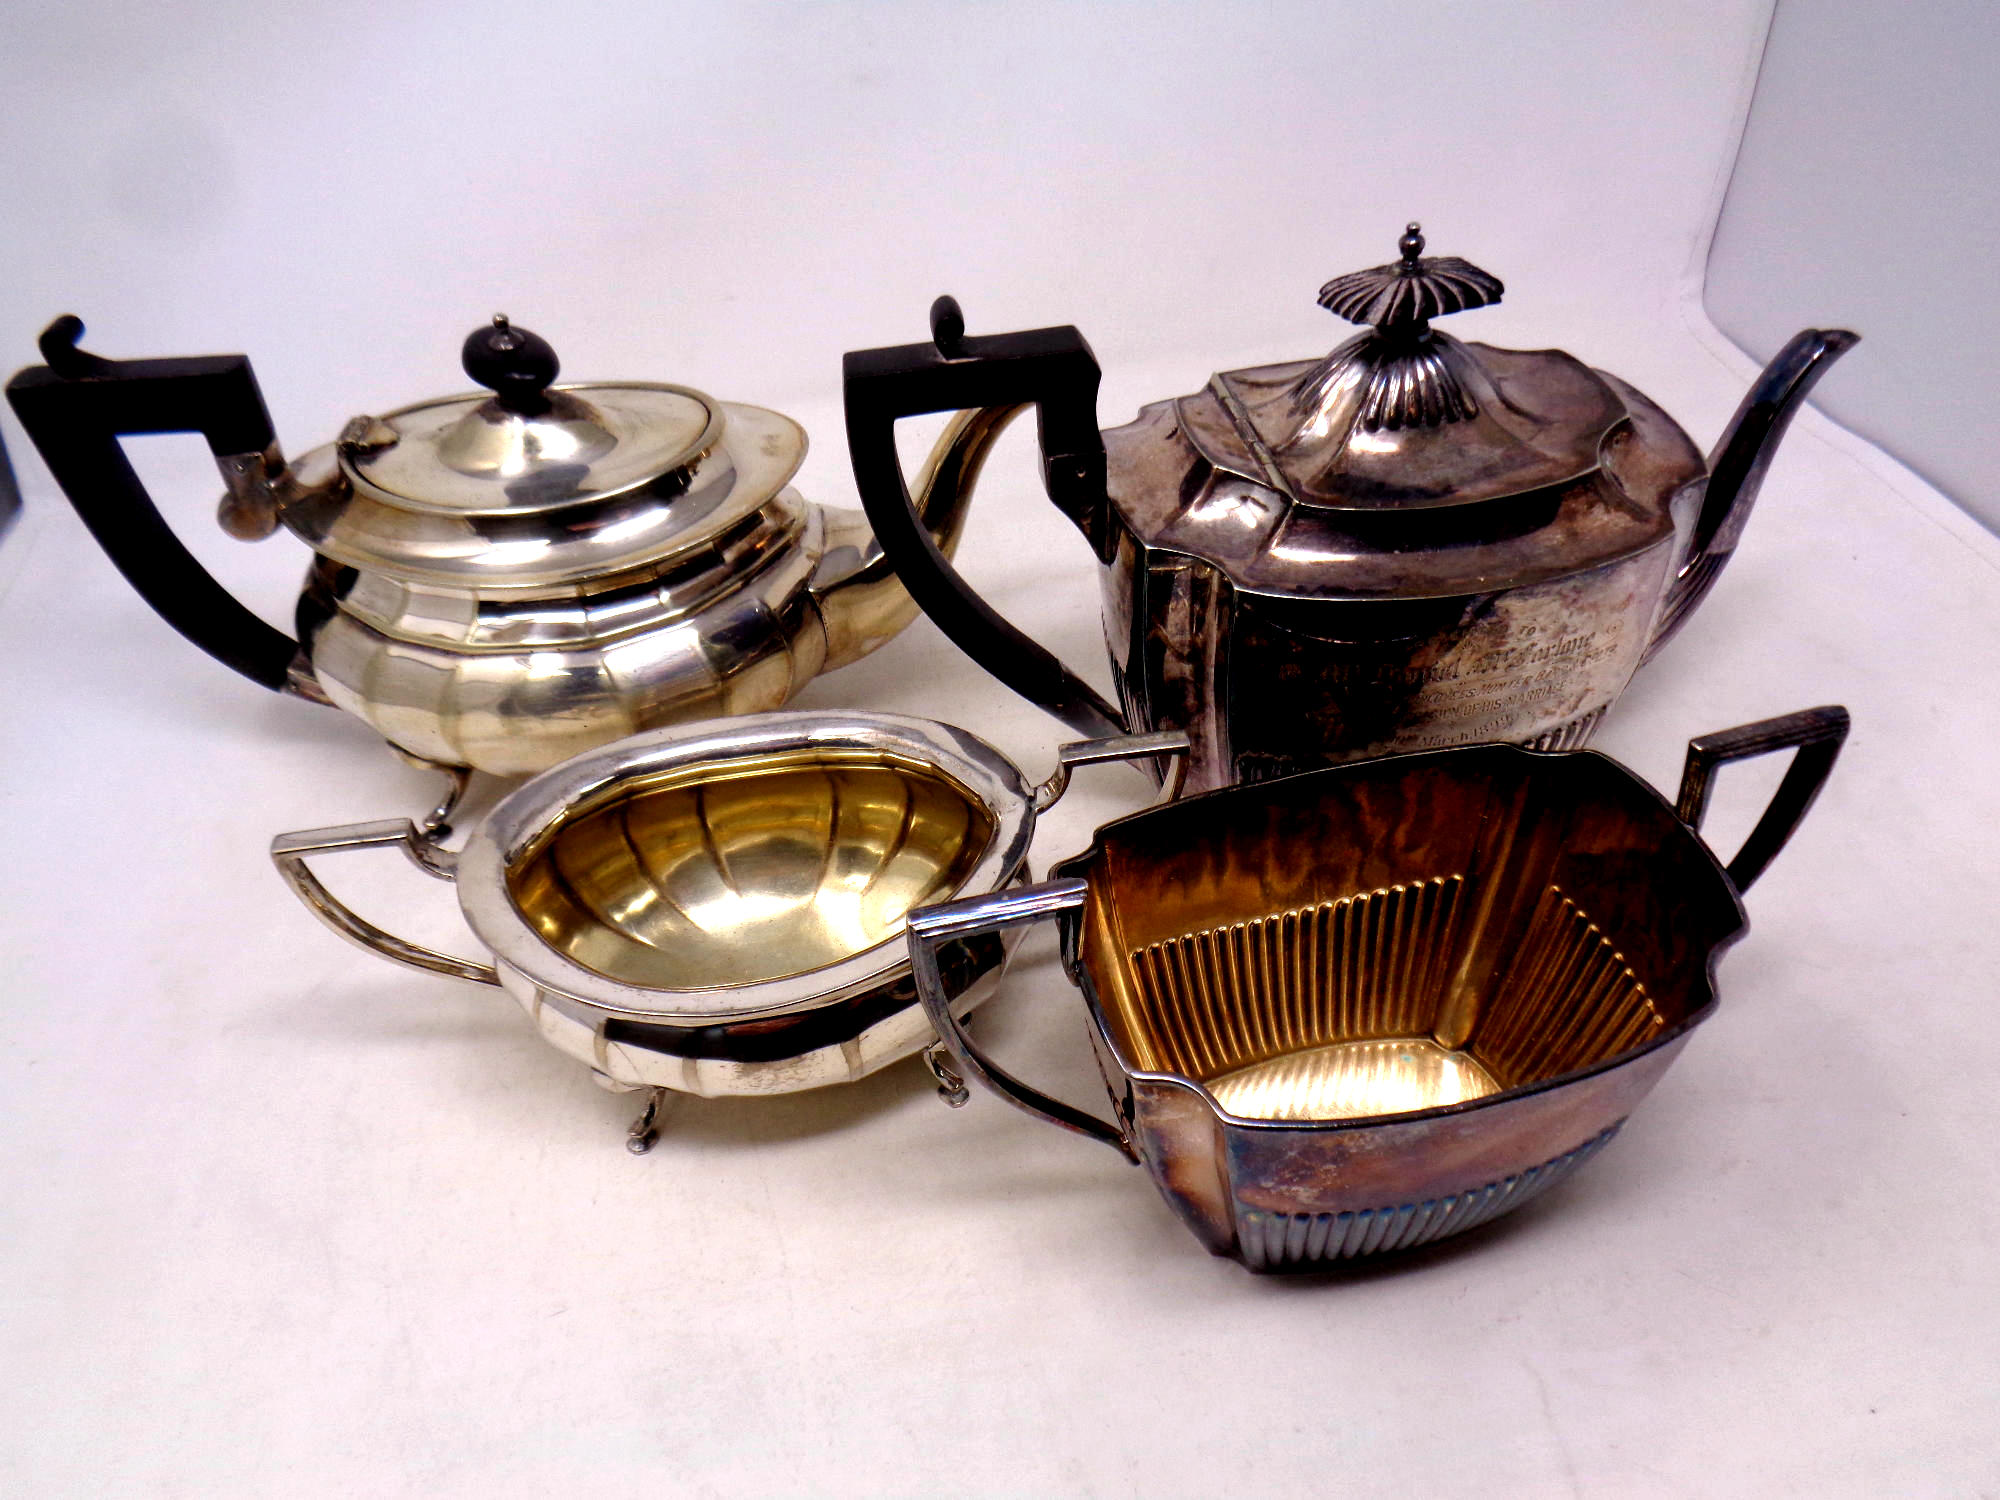 Two antique silver plated teapots with sugar basins